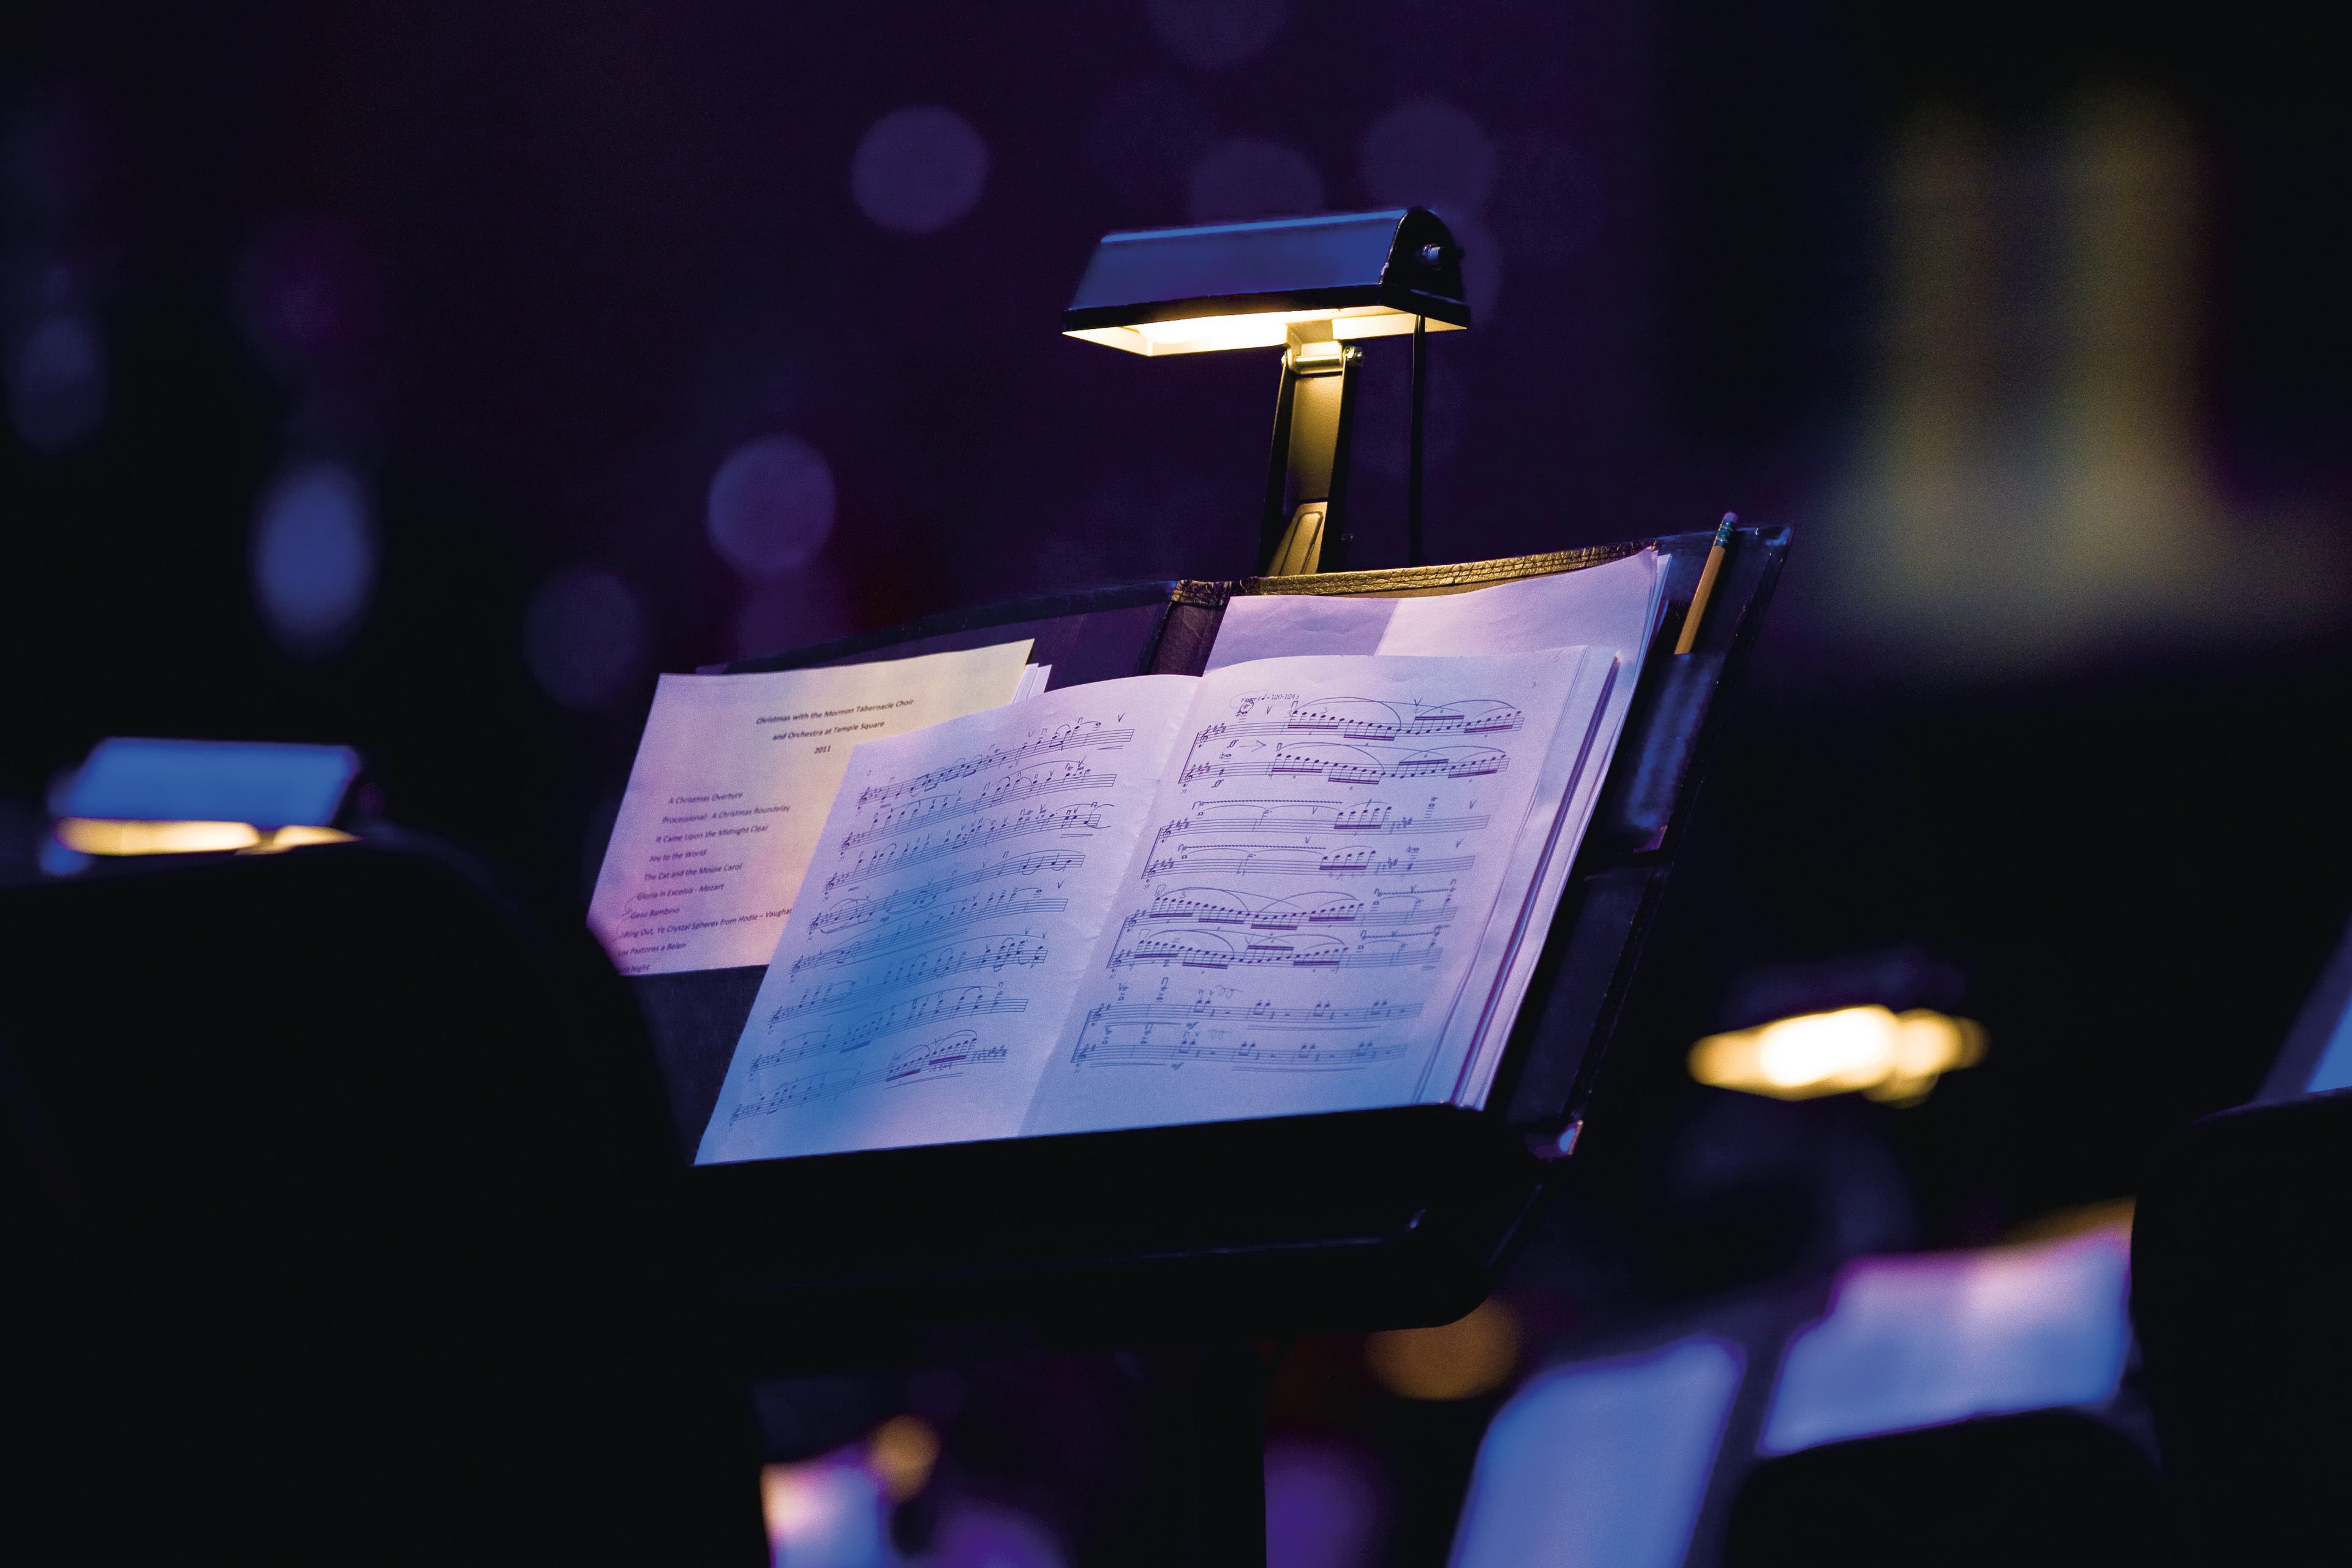 Sheet music sits on a music stand for a performer to read from.